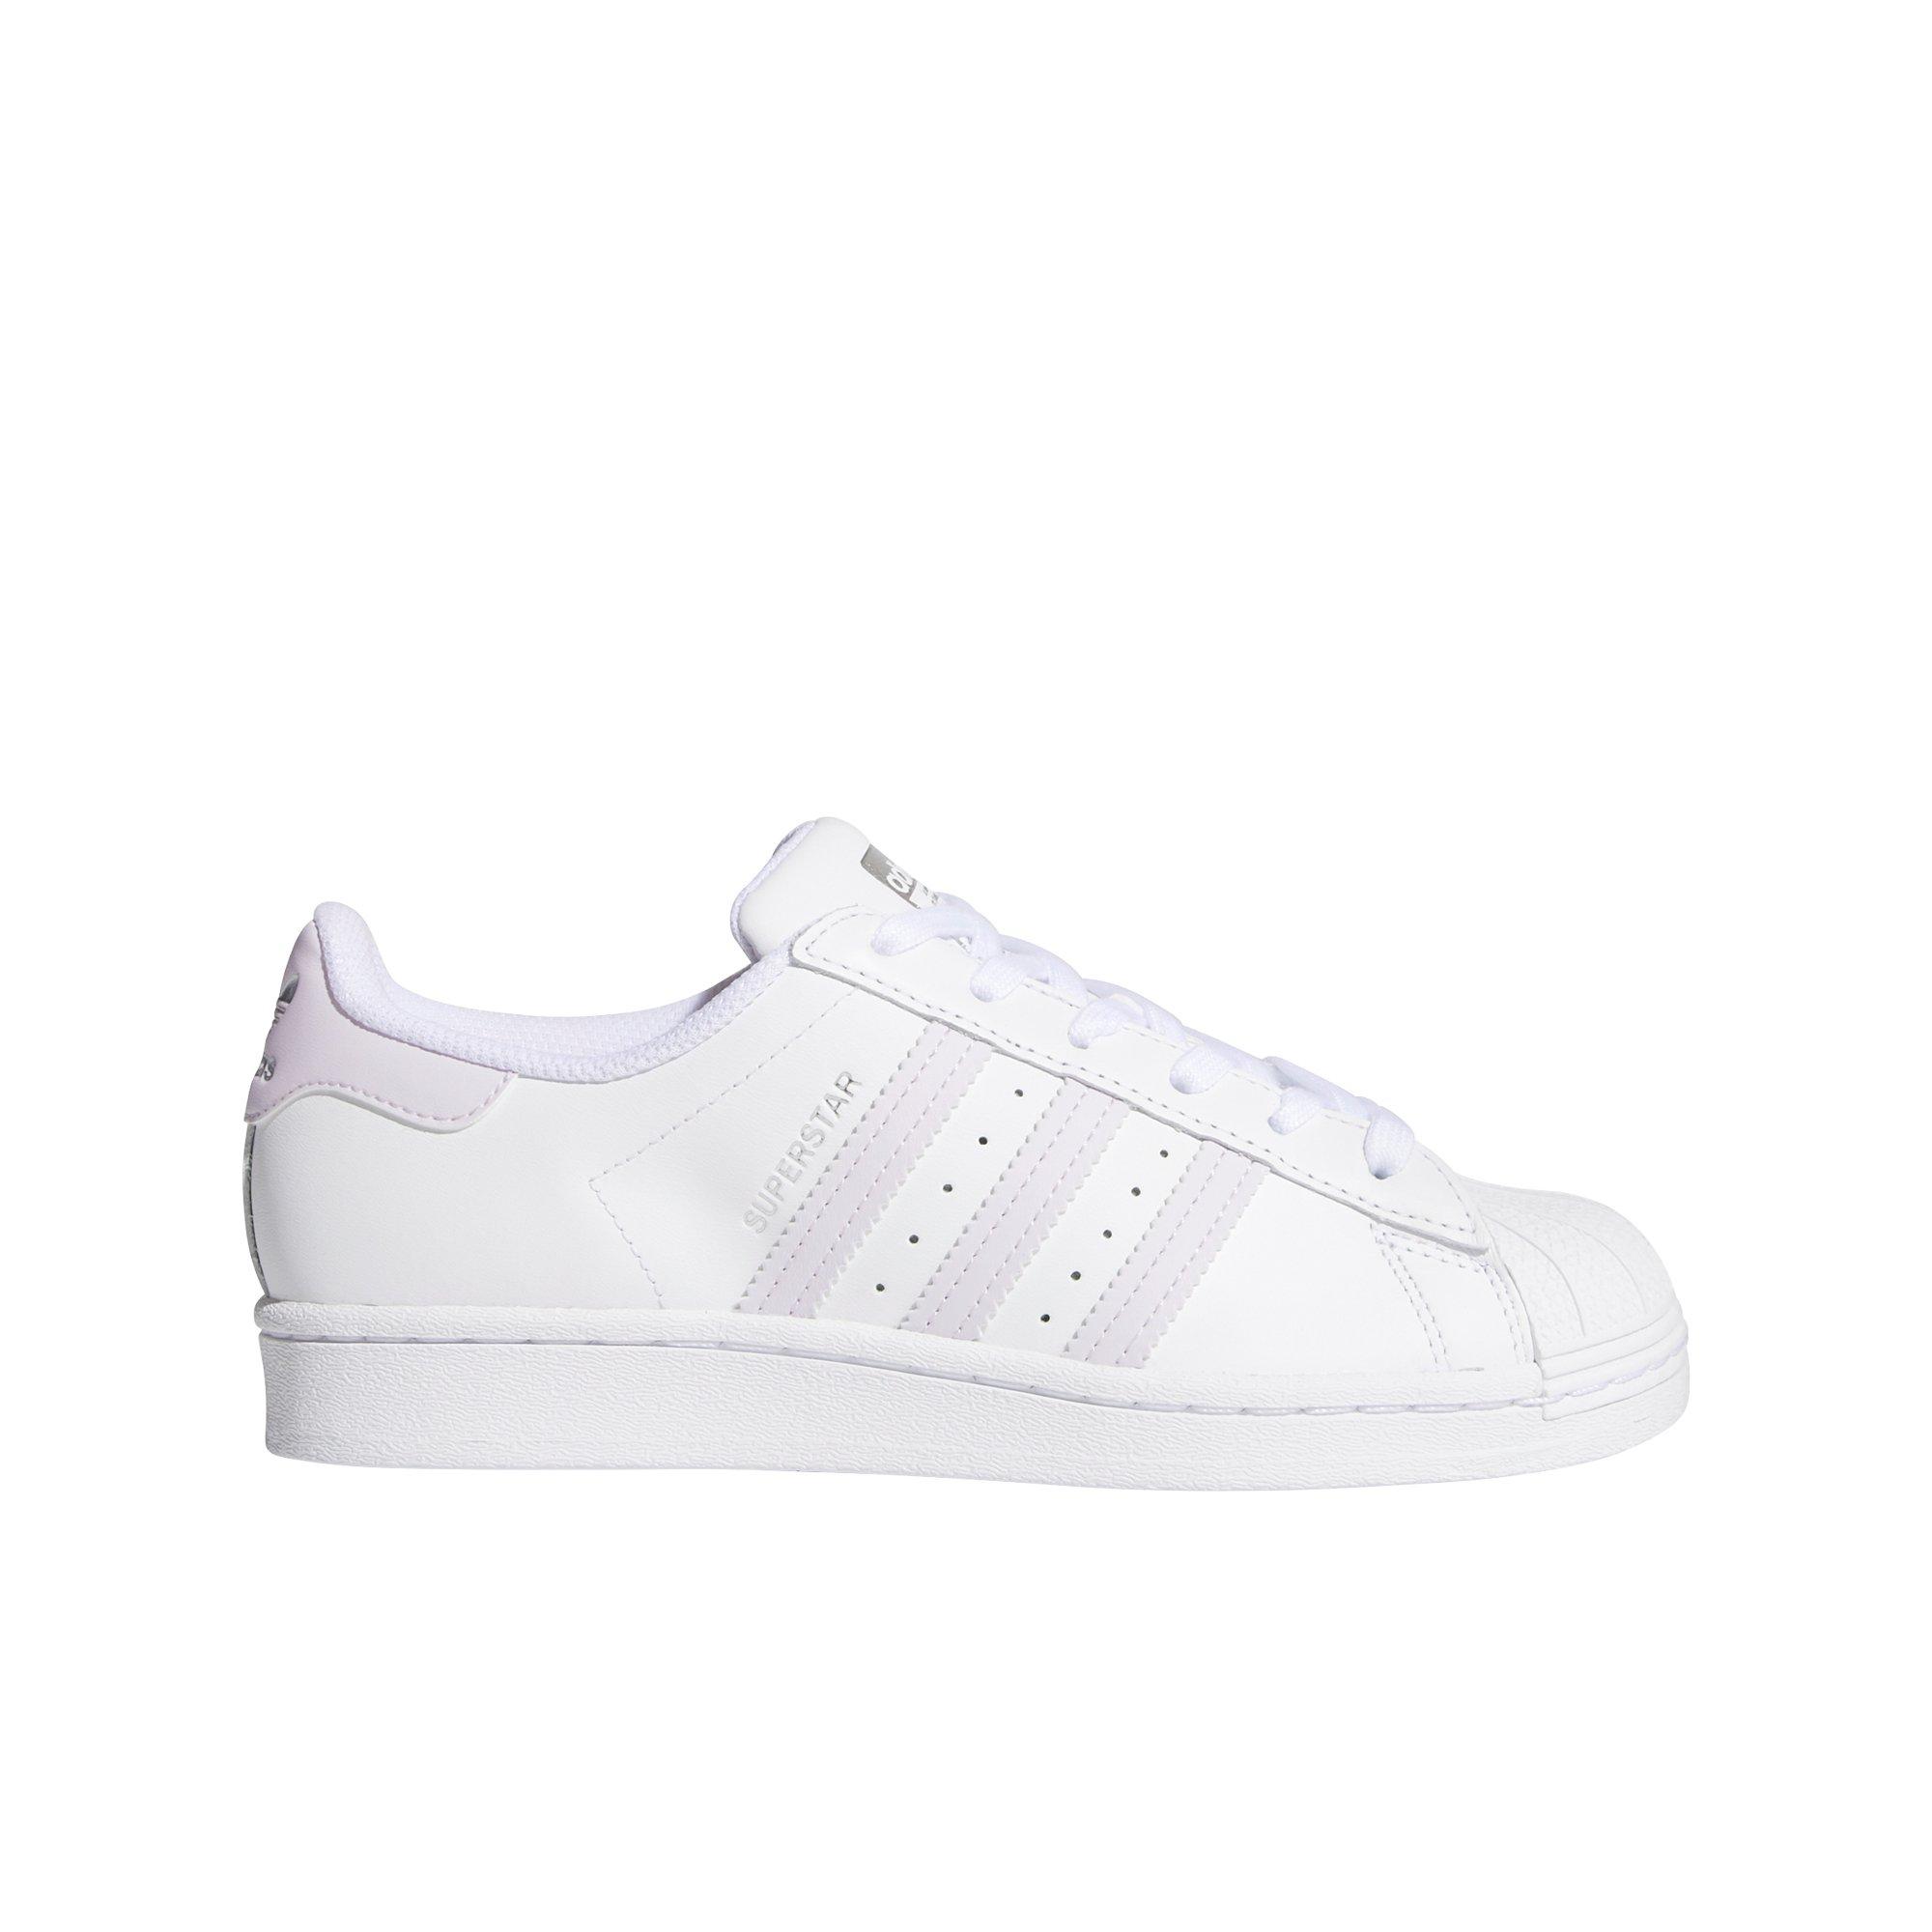 adidas superstar shoes silver